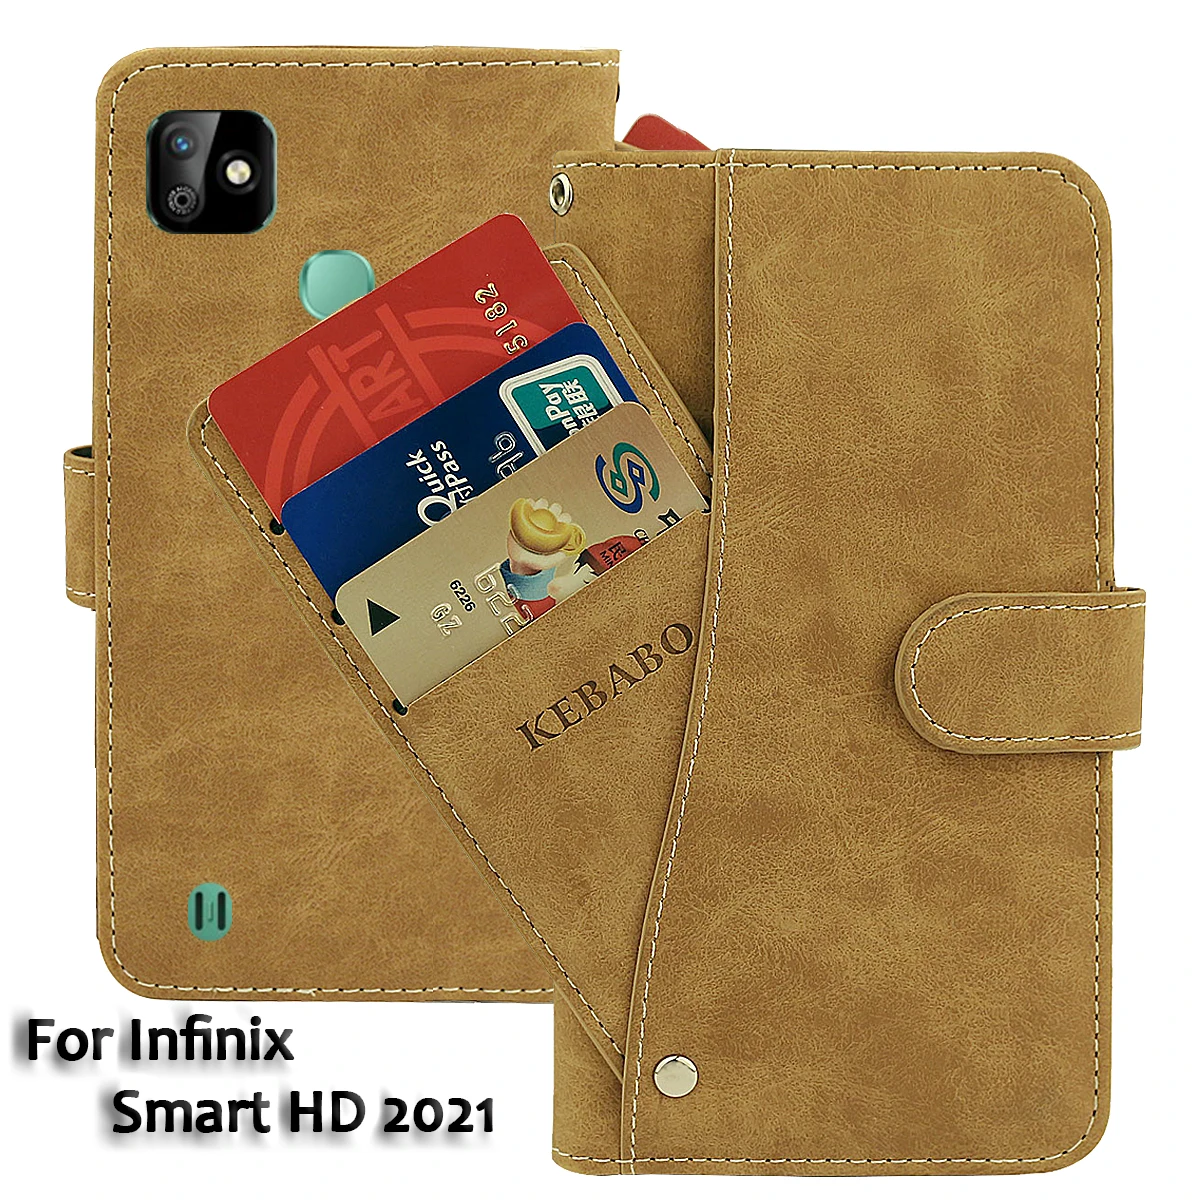 

Vintage Leather Wallet Infinix Smart HD 2021 Case 6.1" Flip Luxury Card Slots Cover Magnet Phone Protective Cases Bags